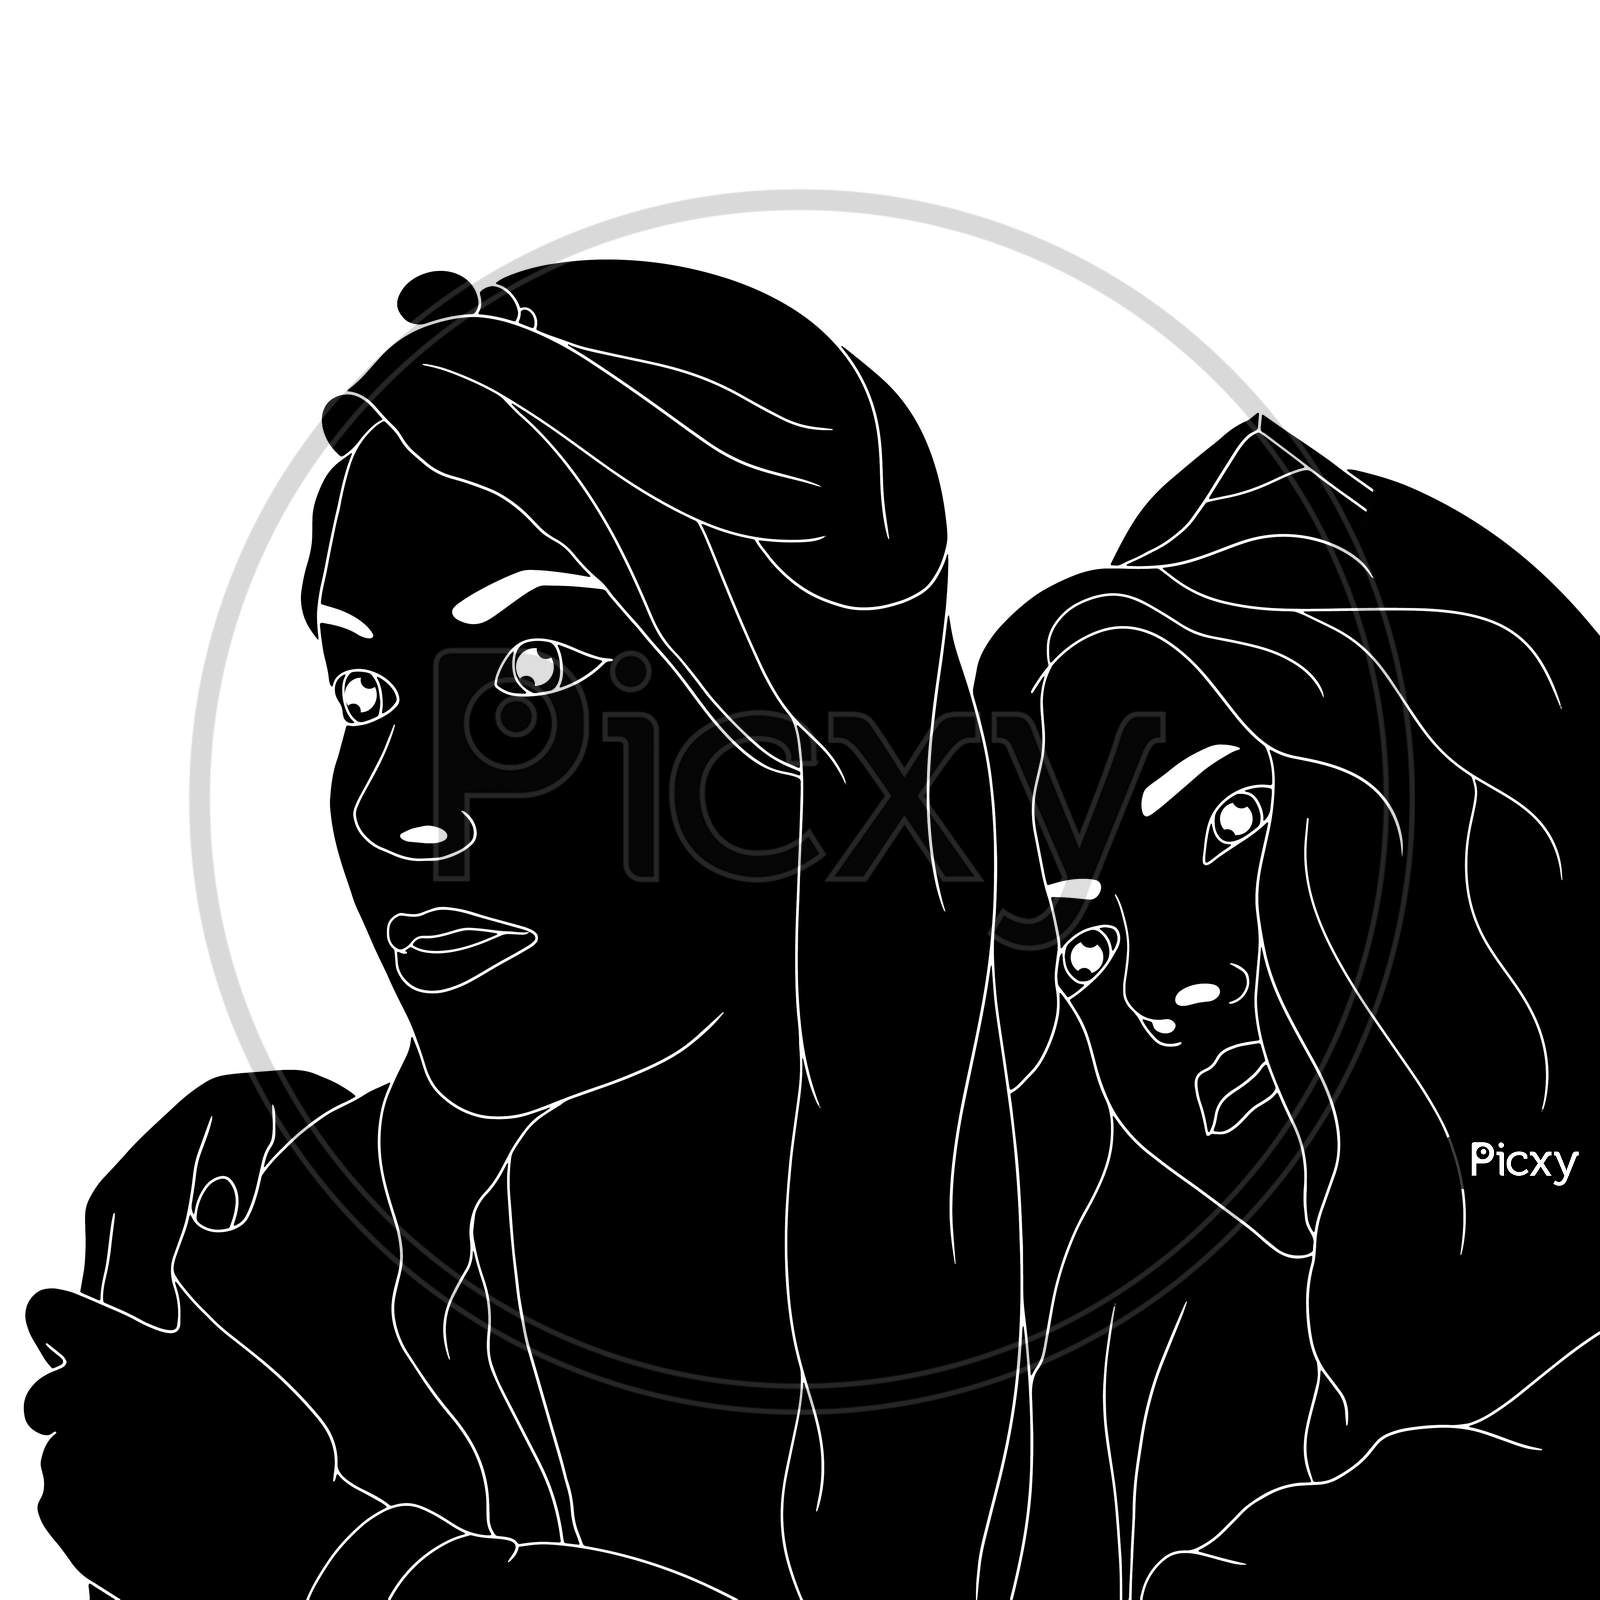 Two Girls In A Cute Pose, Happy Moments Of Friendship, The Silhouette Of People For Friendship Day. Hand-Drawn Character Illustration Of Happy People.